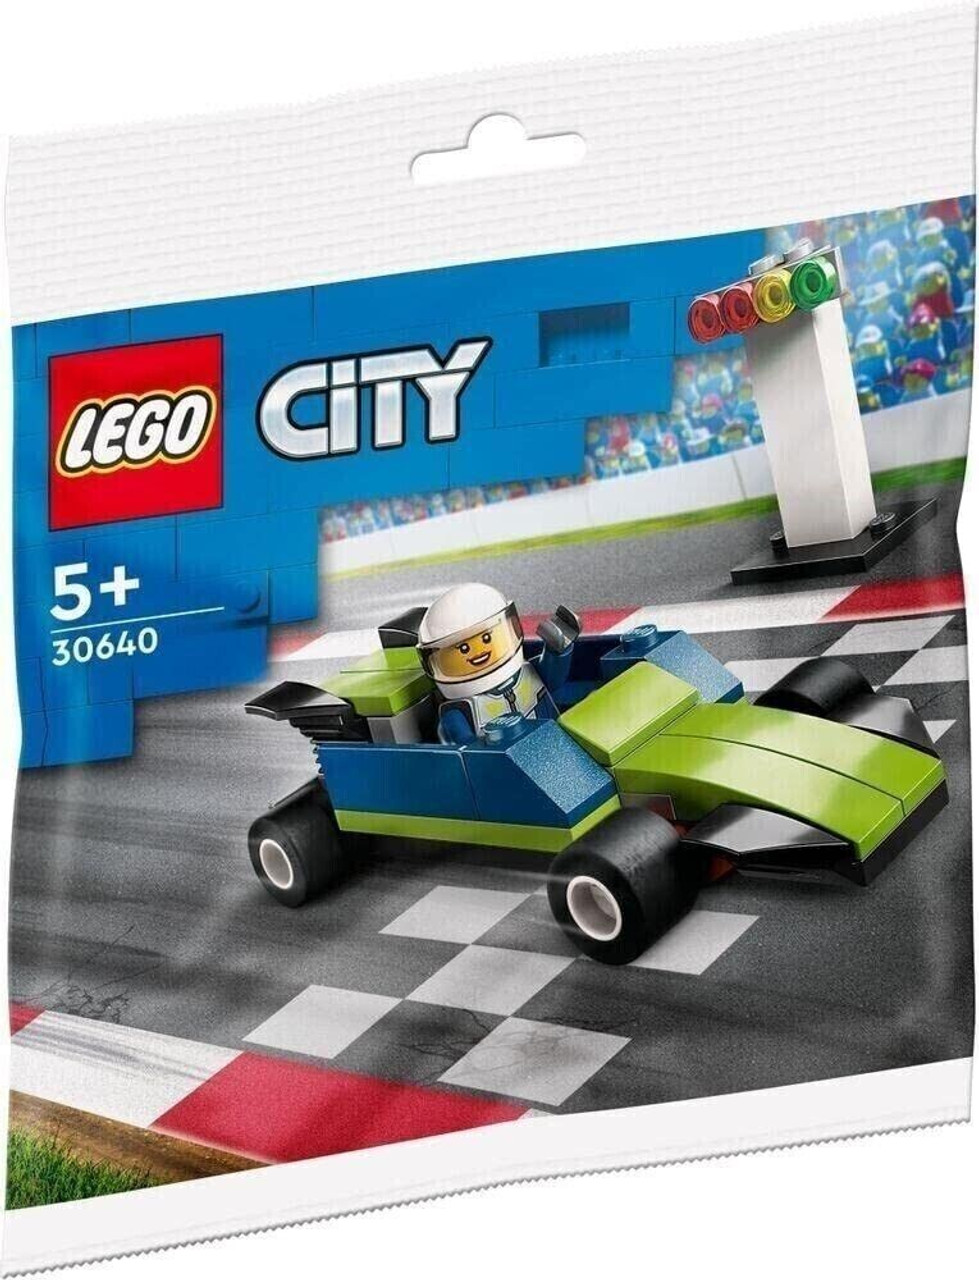 LEGO Race Car 30640 Polybag with Driver Ages 6+